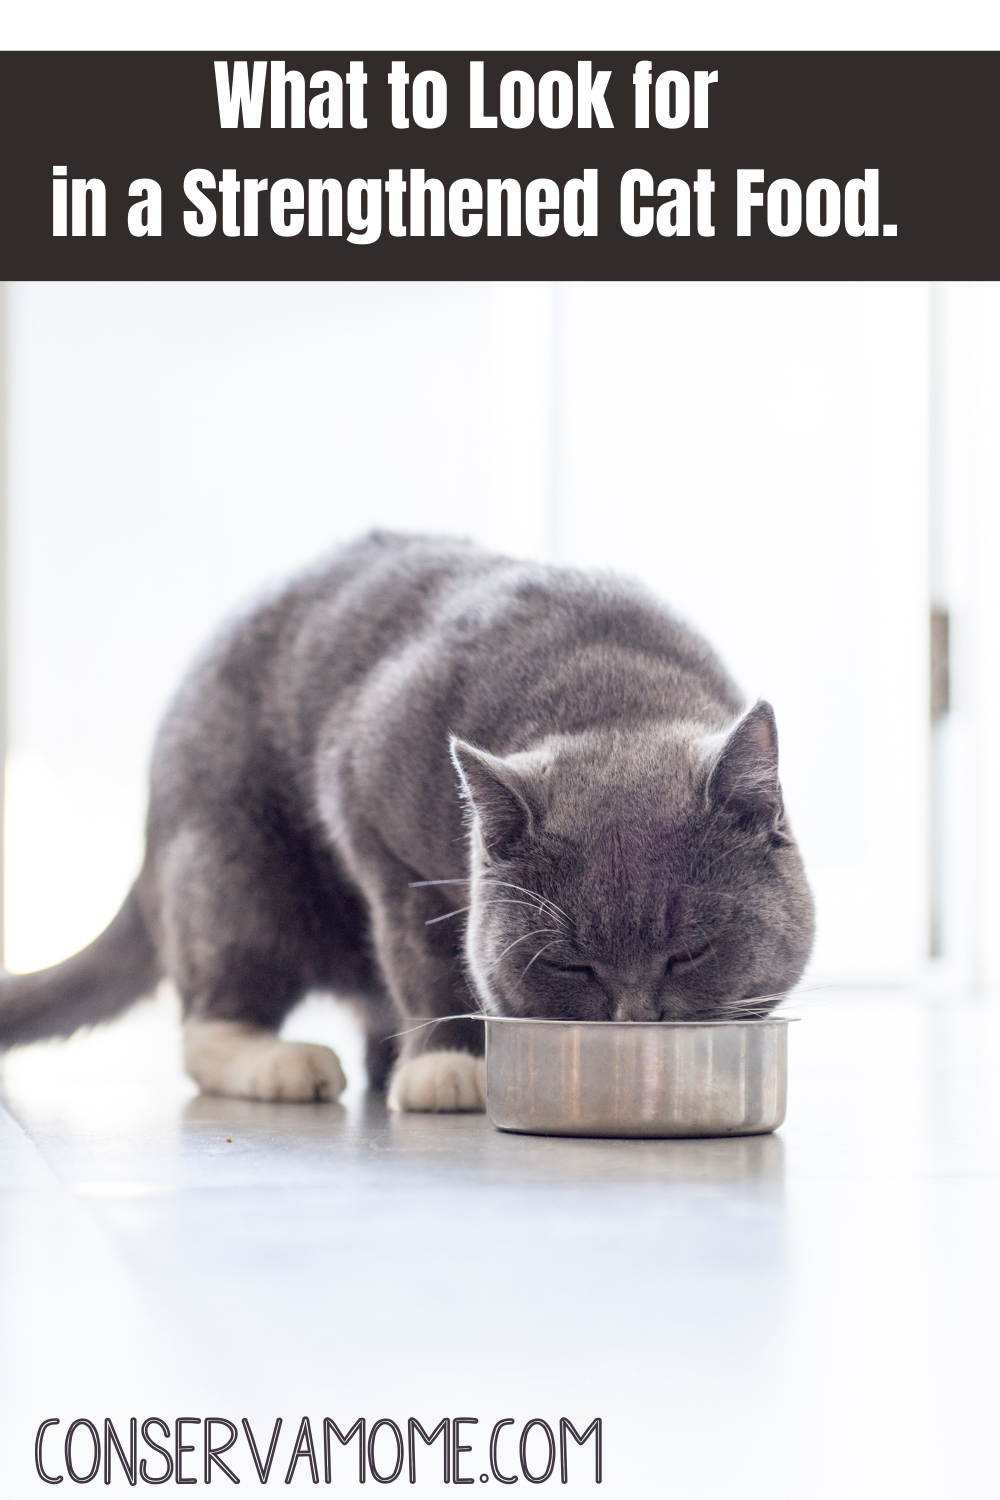 What to Look for in a Strengthened Cat Food.